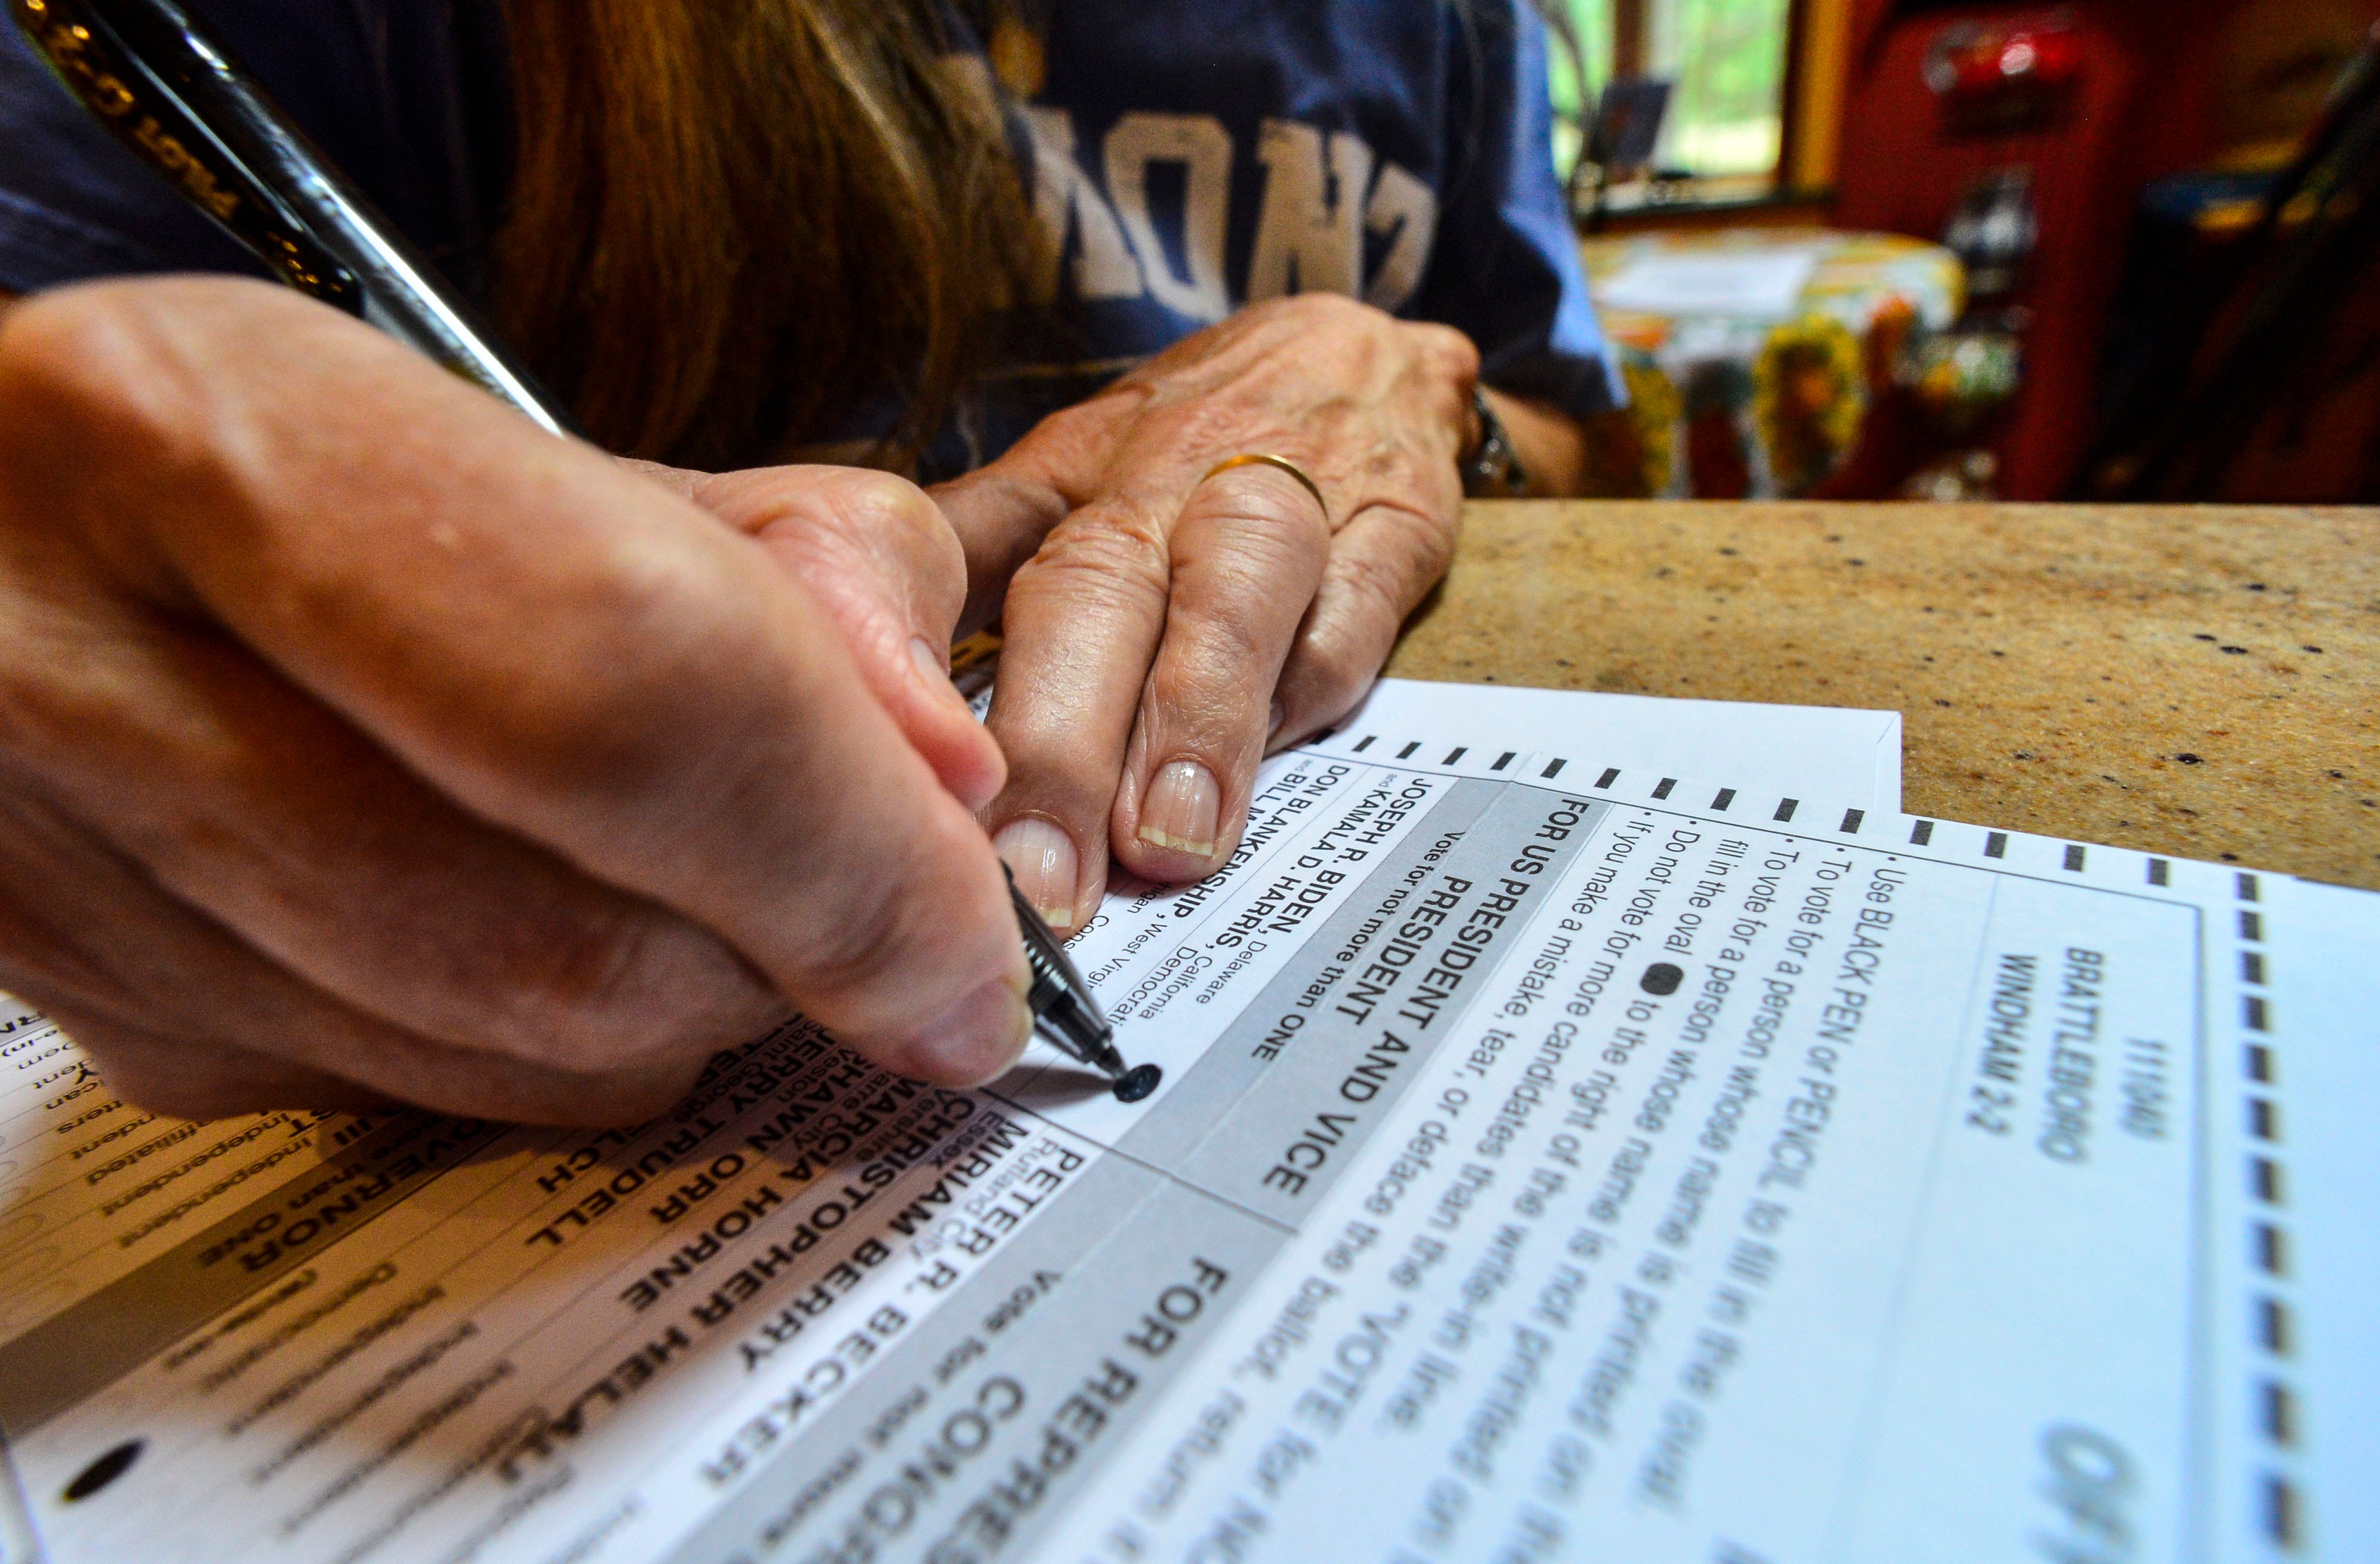 Susan Avery, of Brattleboro, Vt., casts her vote for Democrat presidential candidate, Joe Biden, while filling out her November election ballot that she received in the mail on Monday, Sept. 28, 2020.